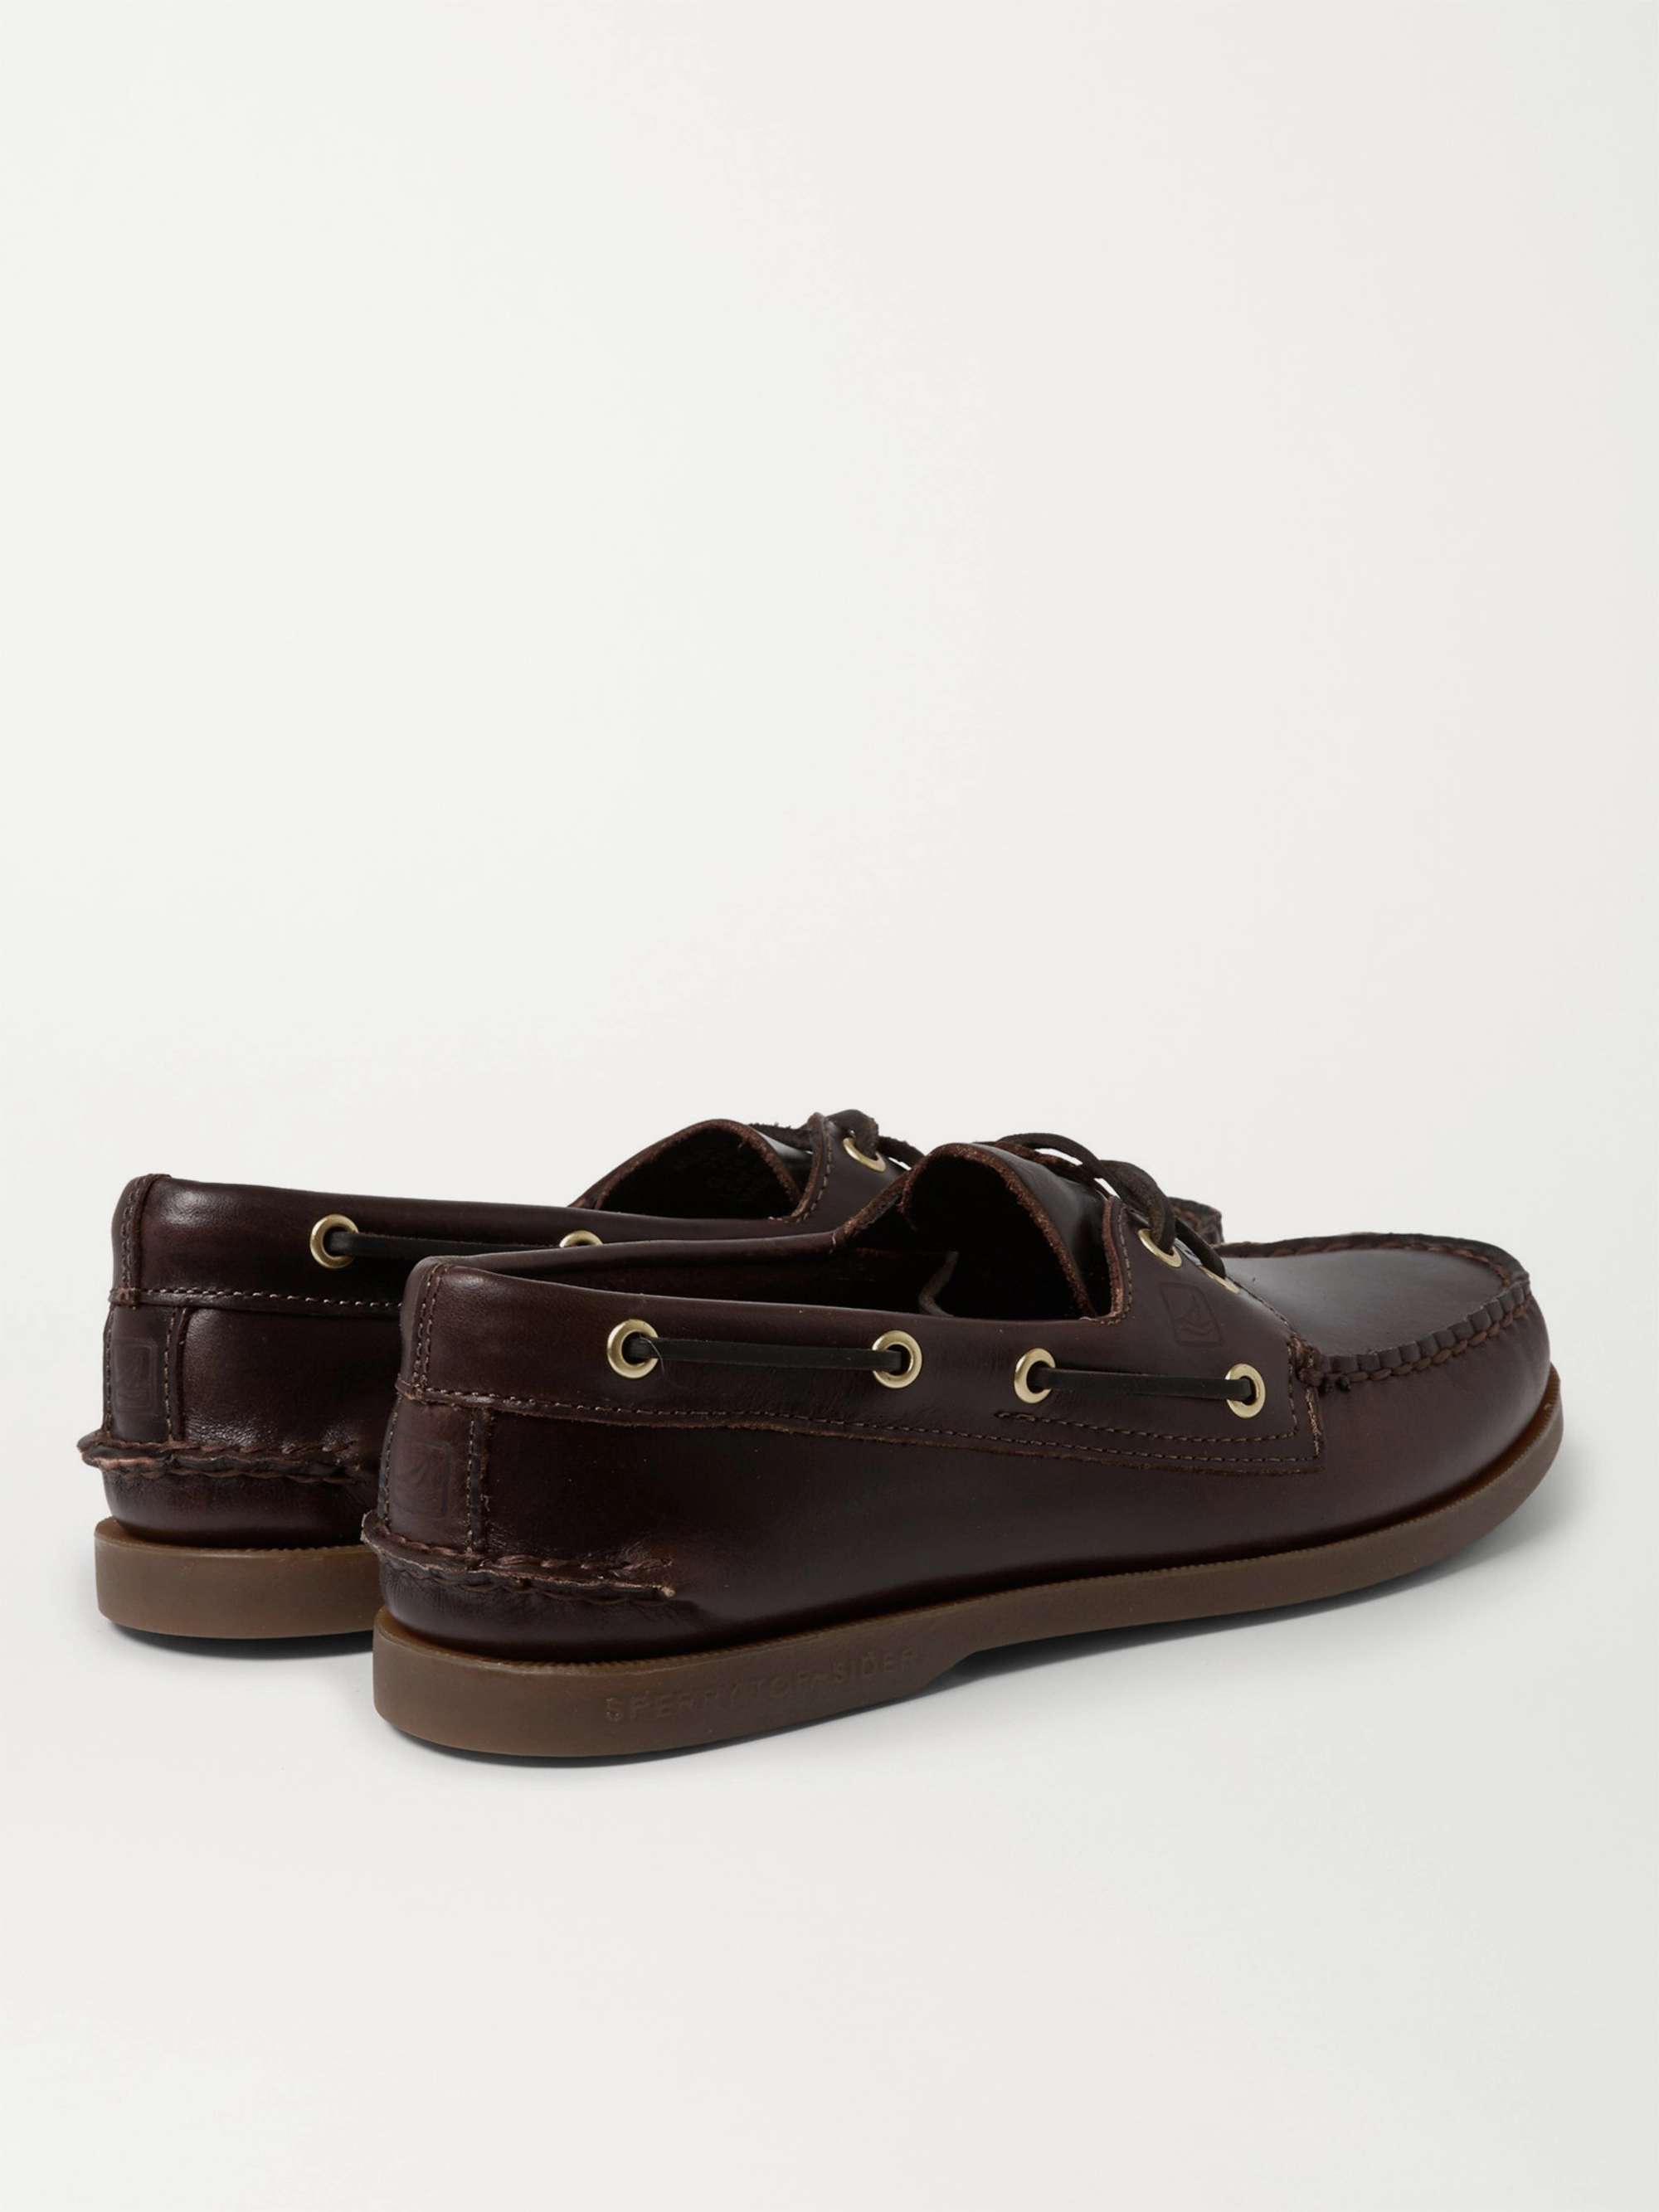 SPERRY Authentic Original Burnished-Leather Boat Shoes MR PORTER